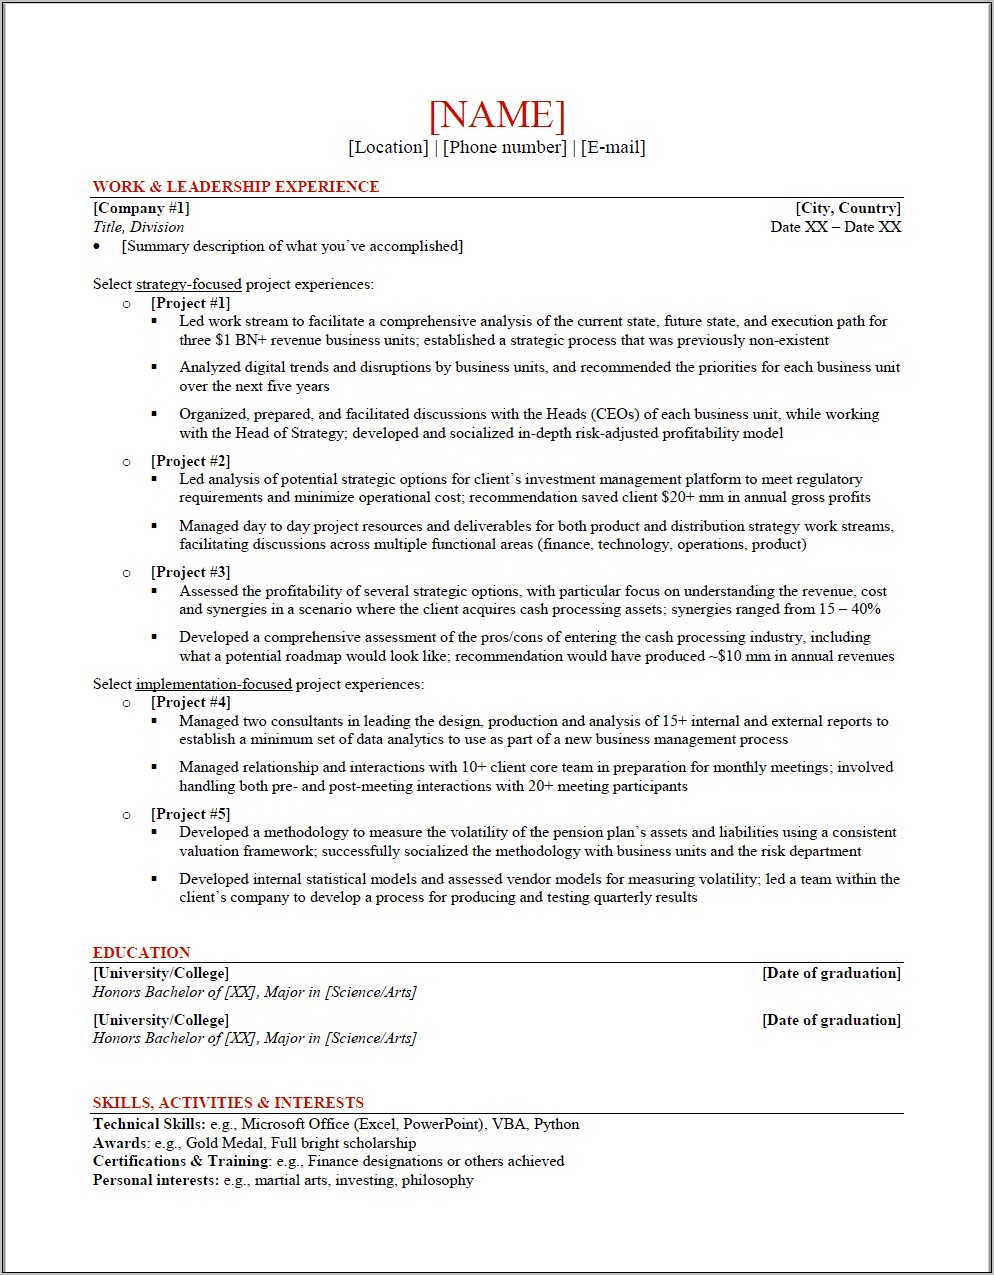 Consulting Cover Letter And Resume Review Service